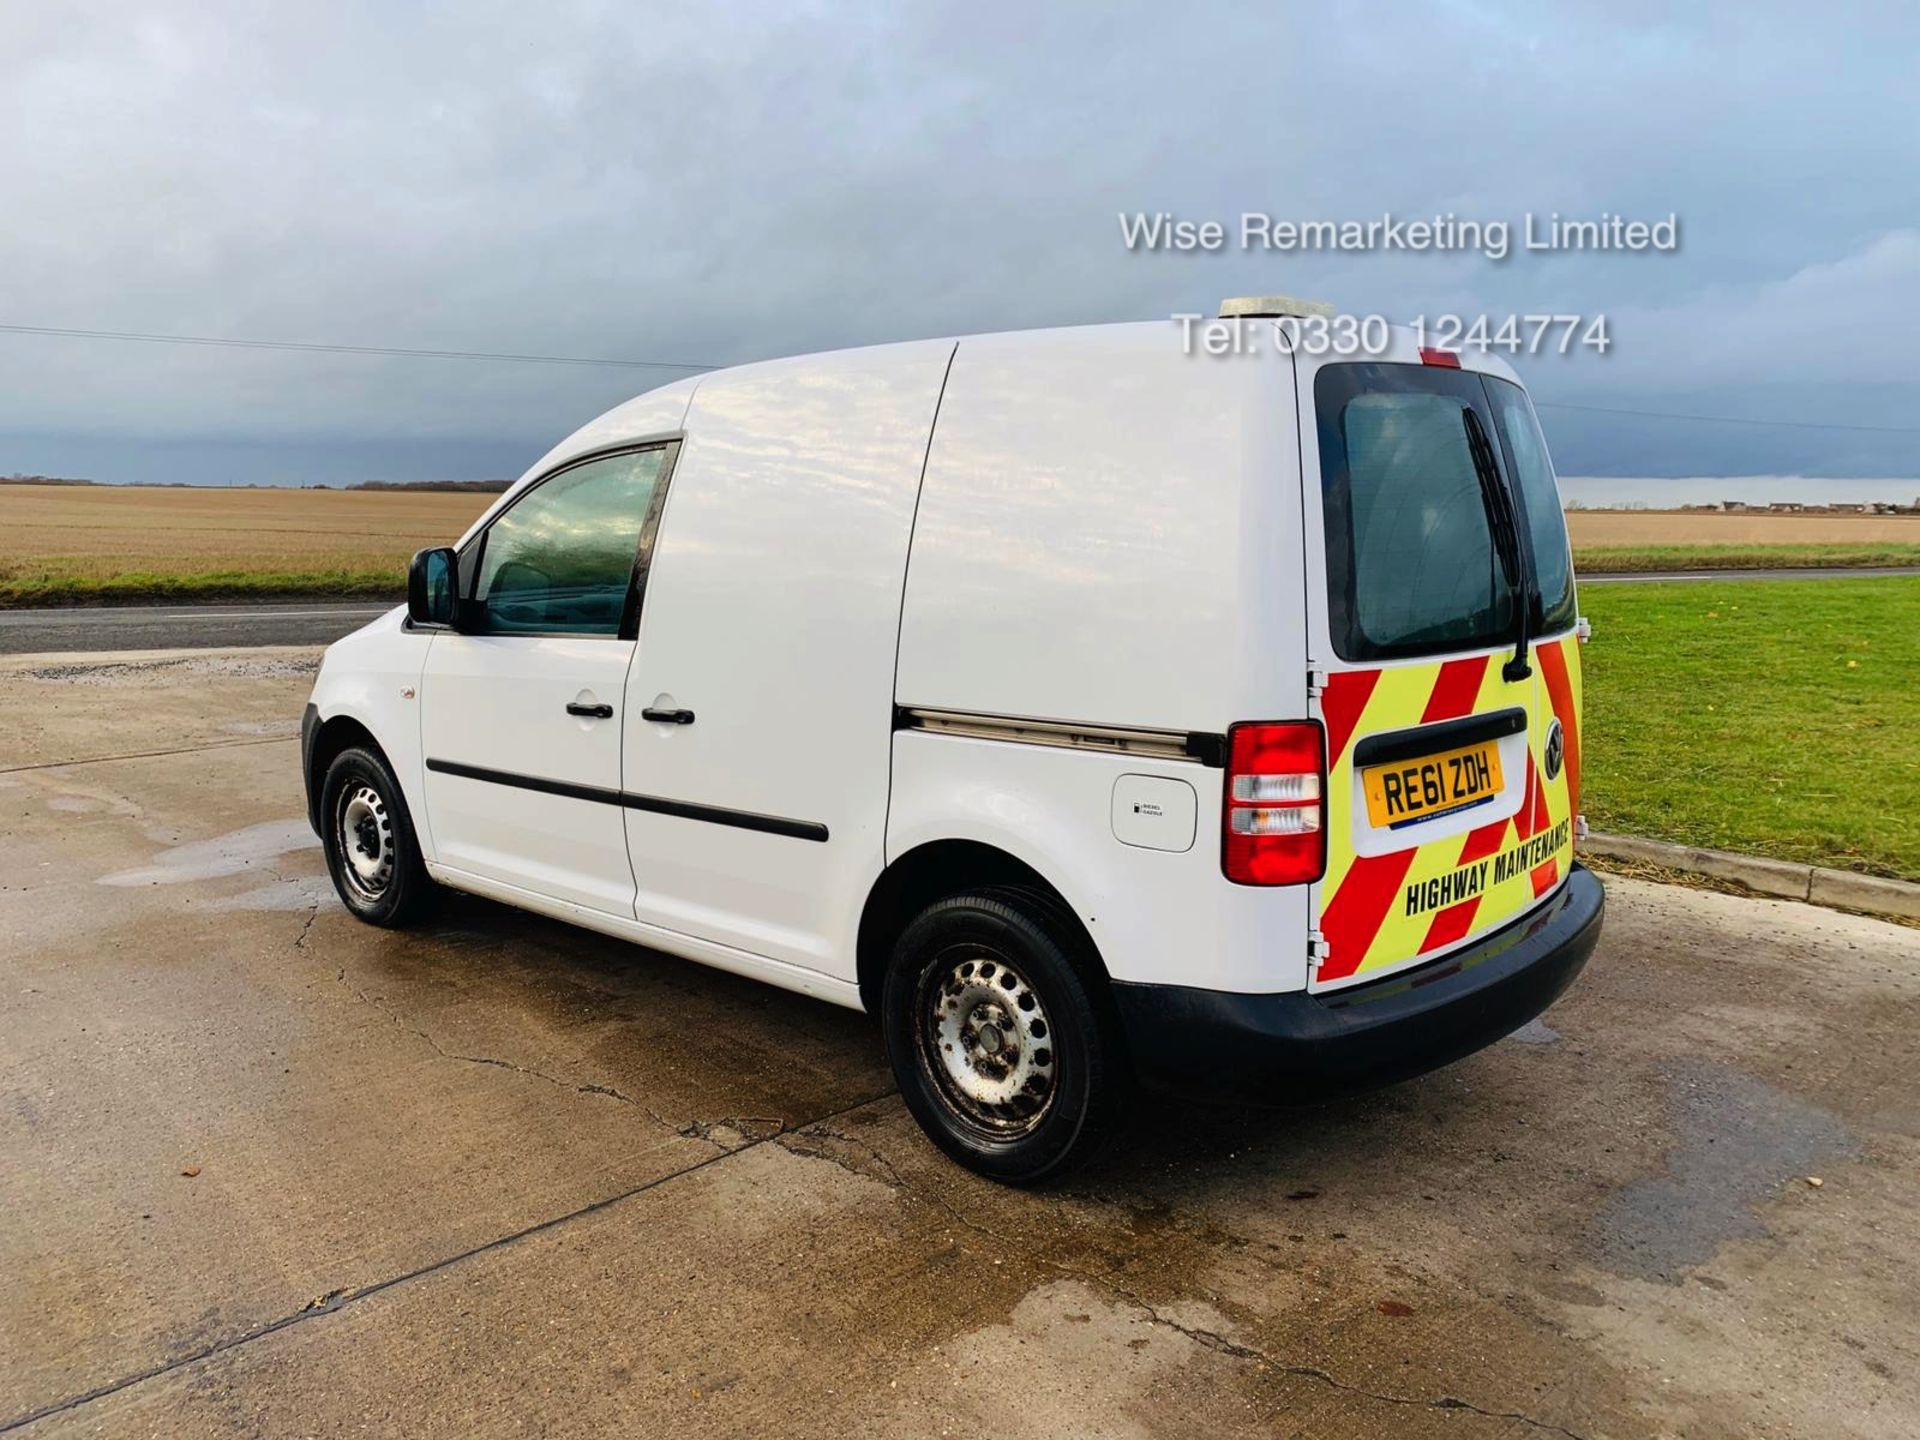 Volkswagen Caddy C20 1.6 TDI - 2012 Model - 1 Keeper From New - Side Loading Door - Ply Lined - Image 8 of 16